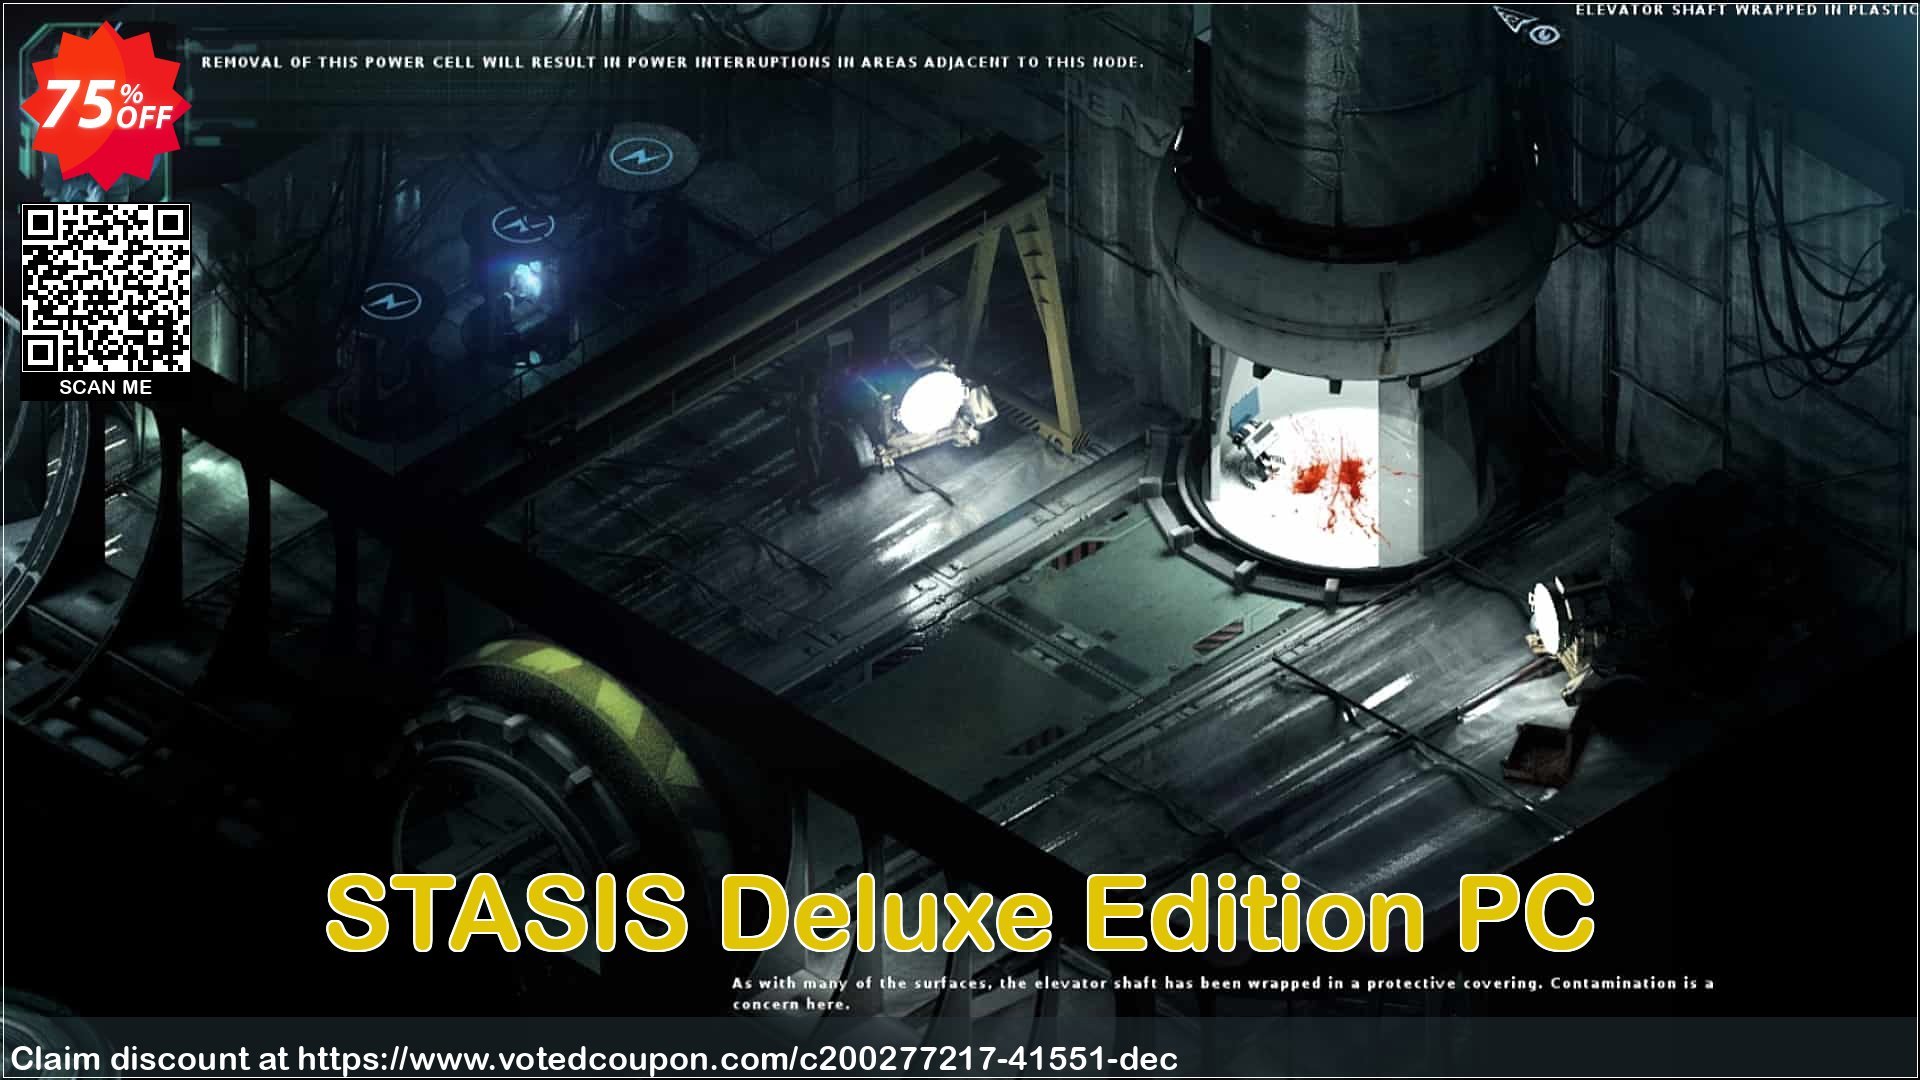 STASIS Deluxe Edition PC Coupon Code May 2024, 75% OFF - VotedCoupon